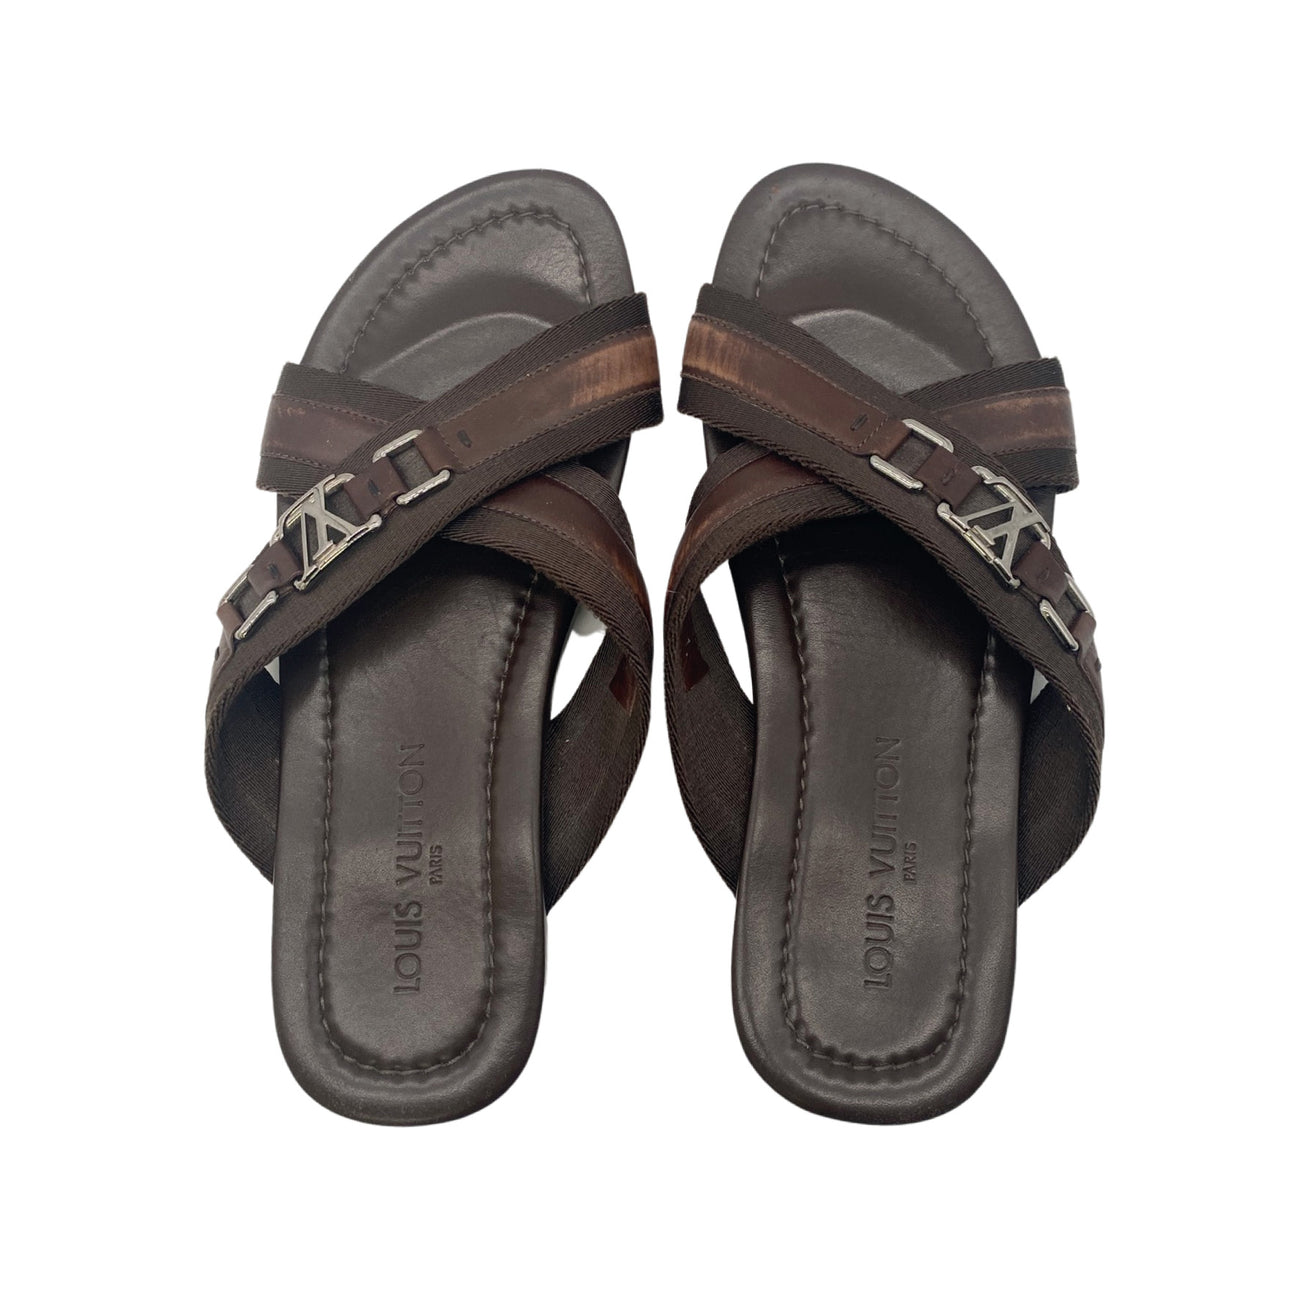 Leather sandals Louis Vuitton Brown size 42 EU in Leather - 35954336